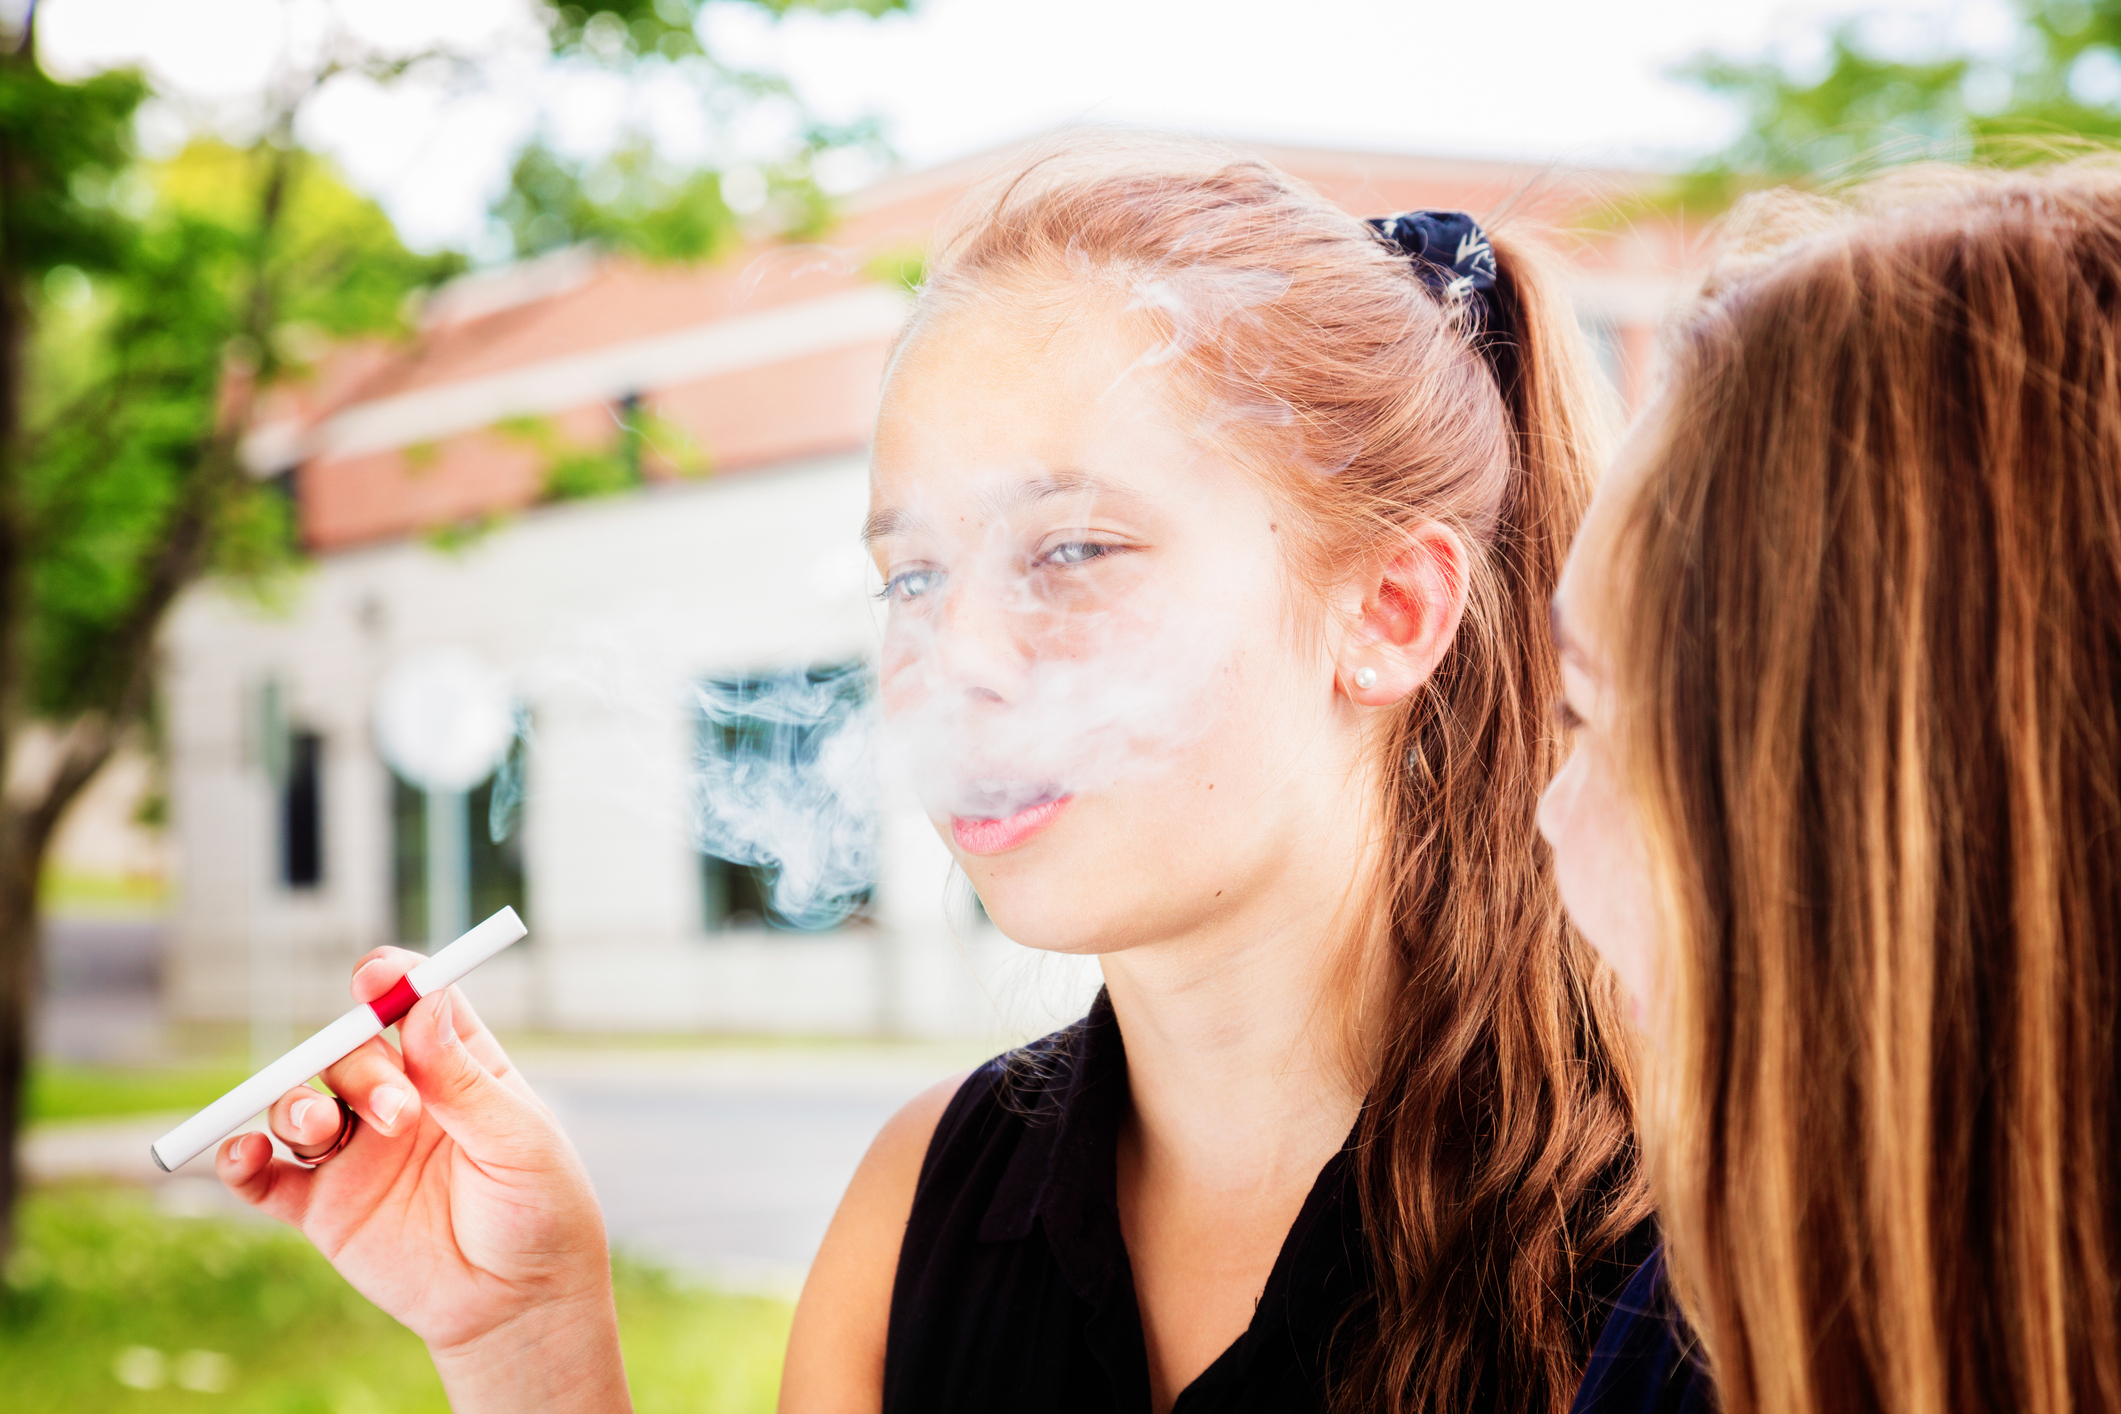 A Few Comments on E-Cigarettes and Cigarette Smoking Among Adolescents and Young Adults